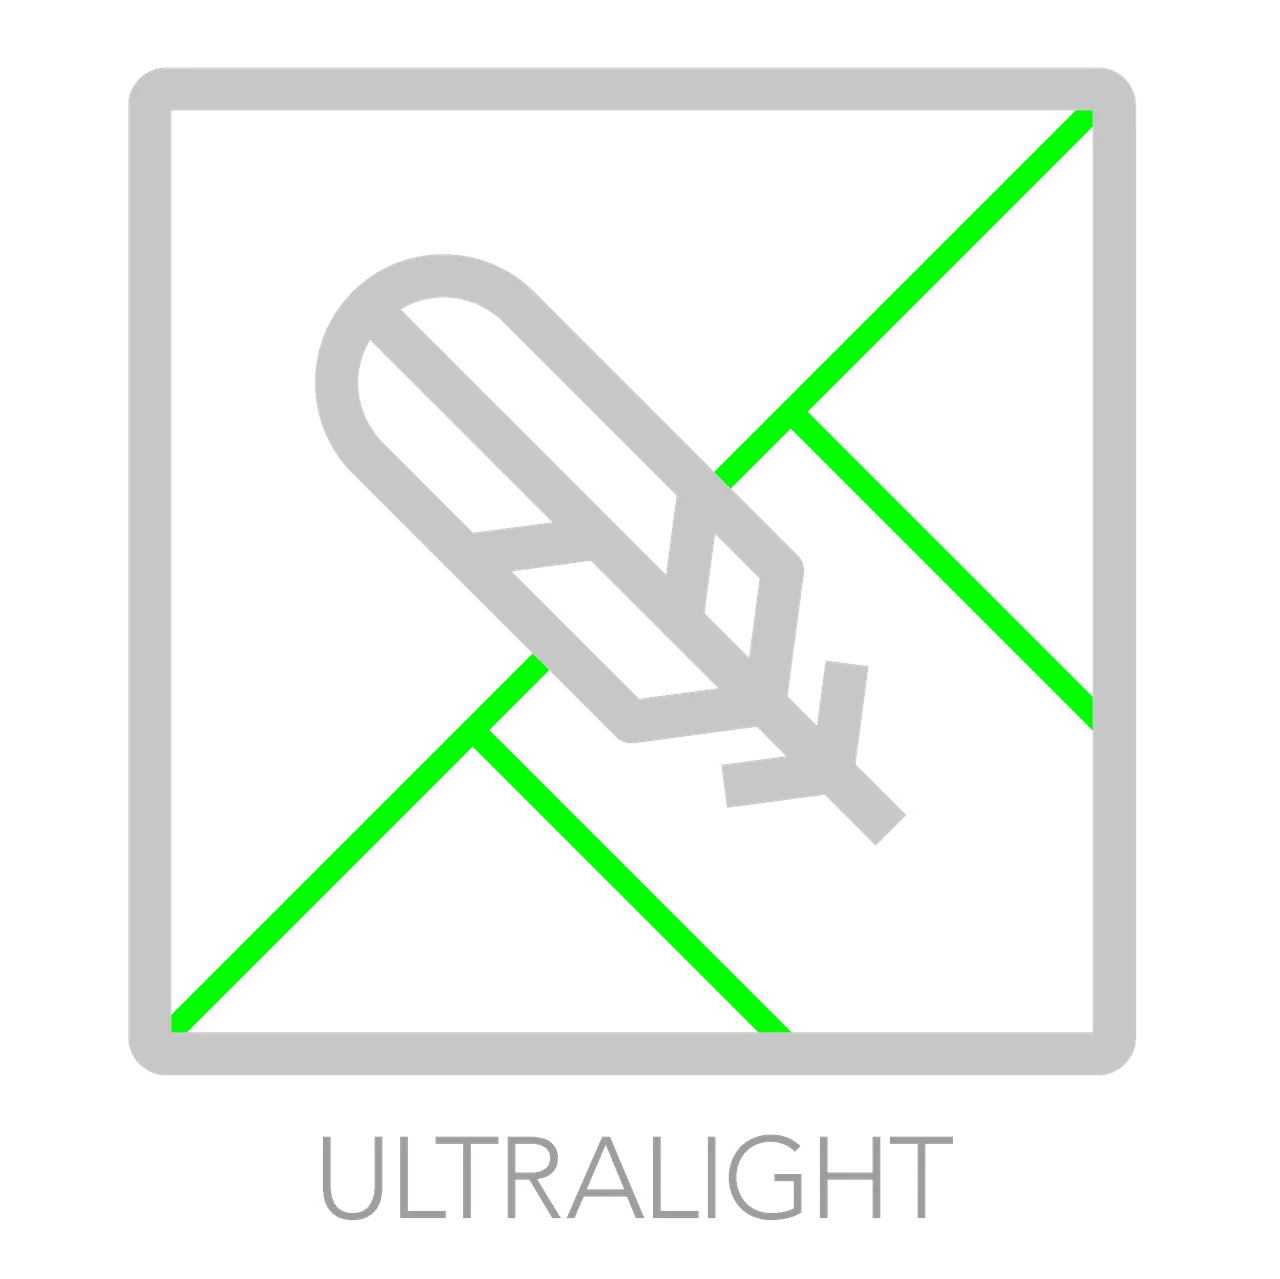 Ultralight-Icon.png